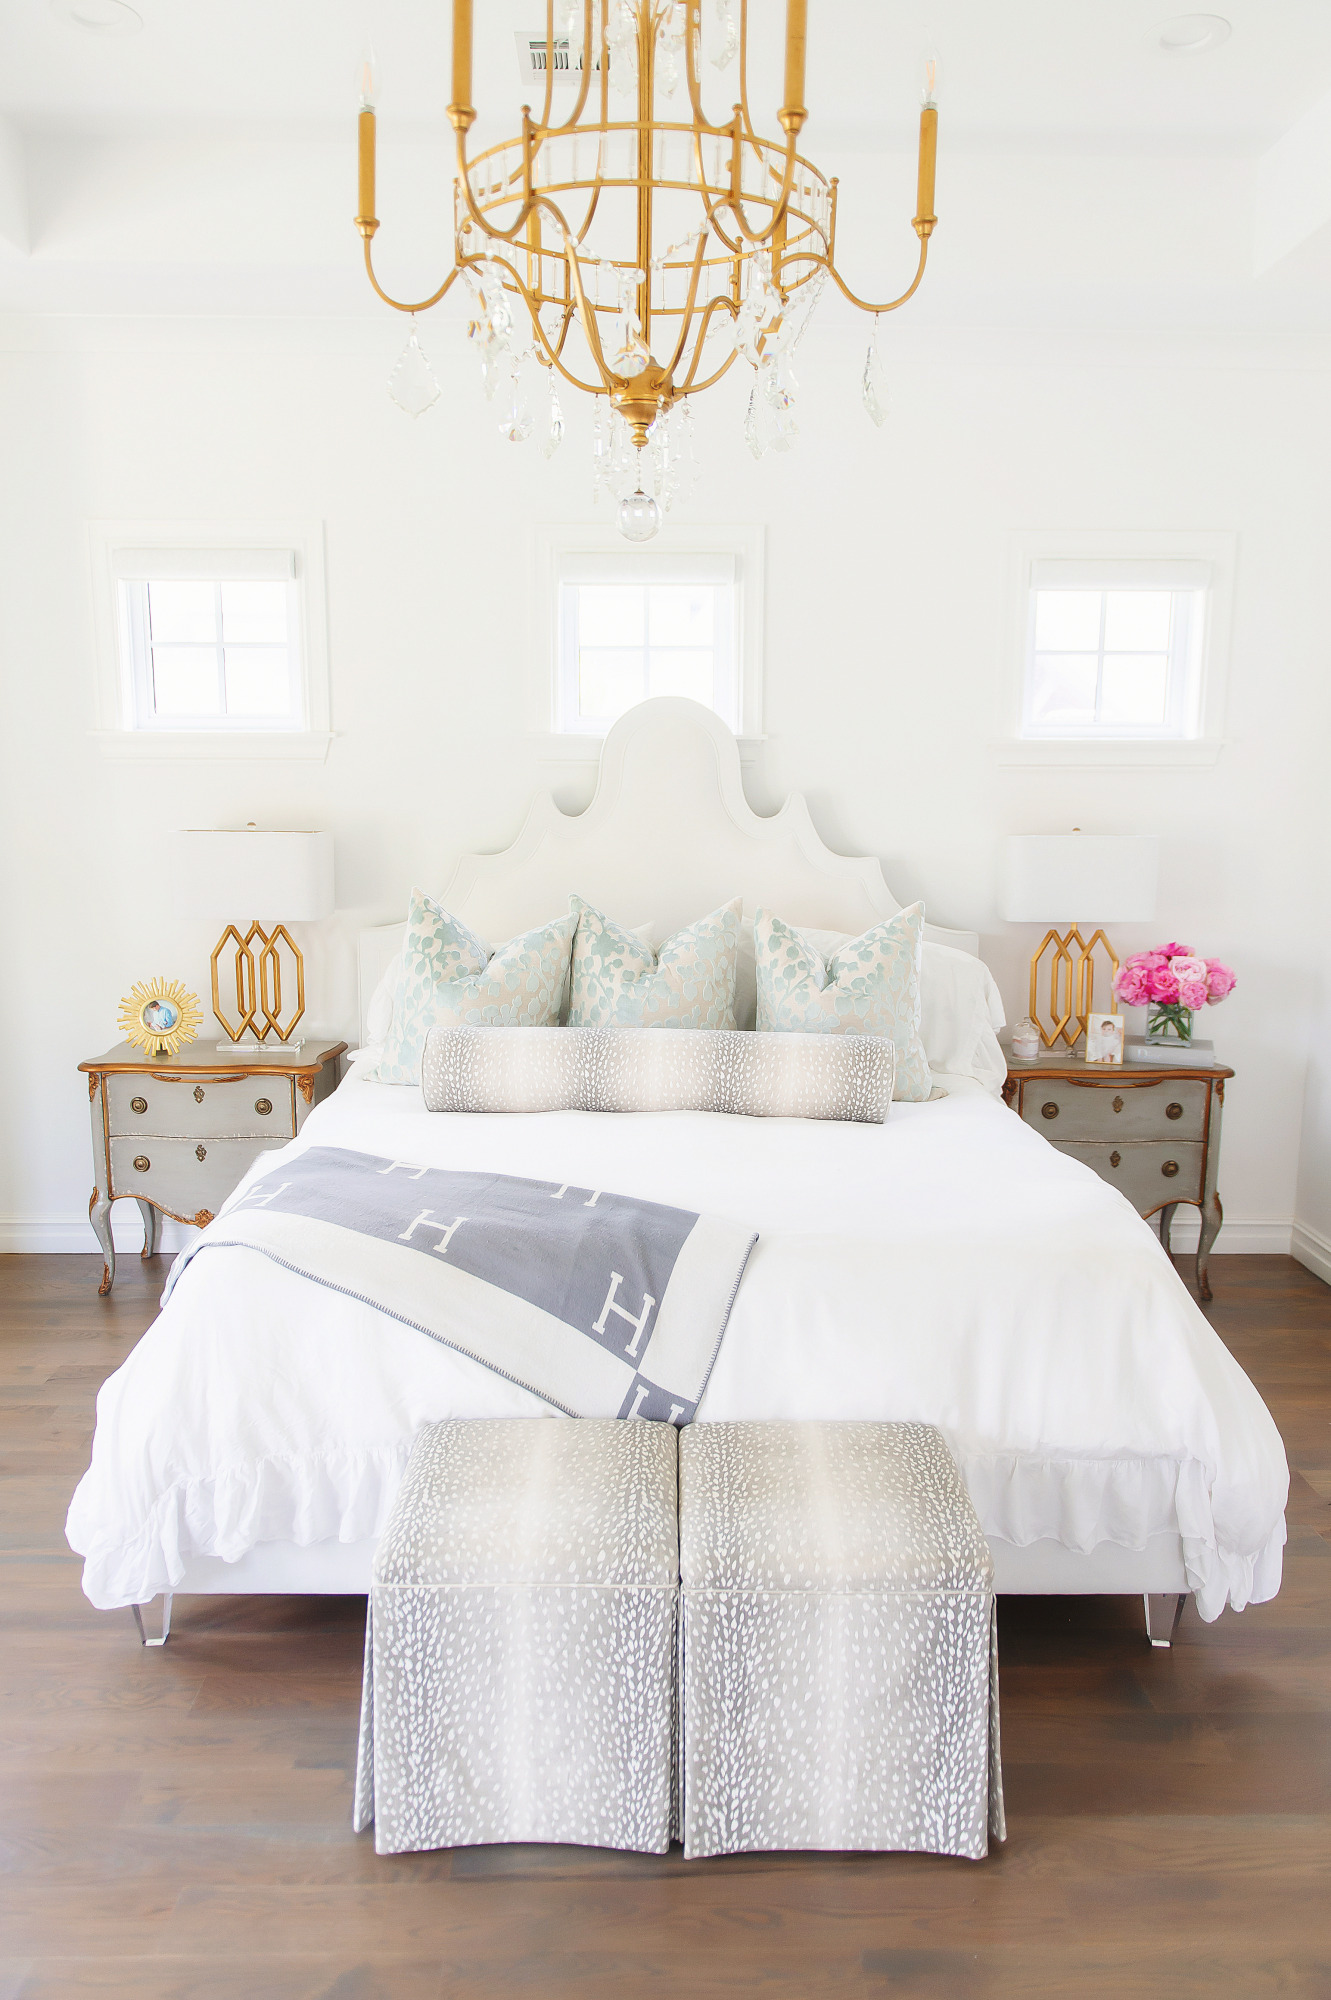 Blog Design by popular US lifestyle blog, The Sweetest Thing: image of Emily Gemma's master bedroom with a gold and crystal chandelier, grey wood night stands, antelope print bench, and a bed with a fabric headboard, antelope print lumbar pillow and white duvet cover. 